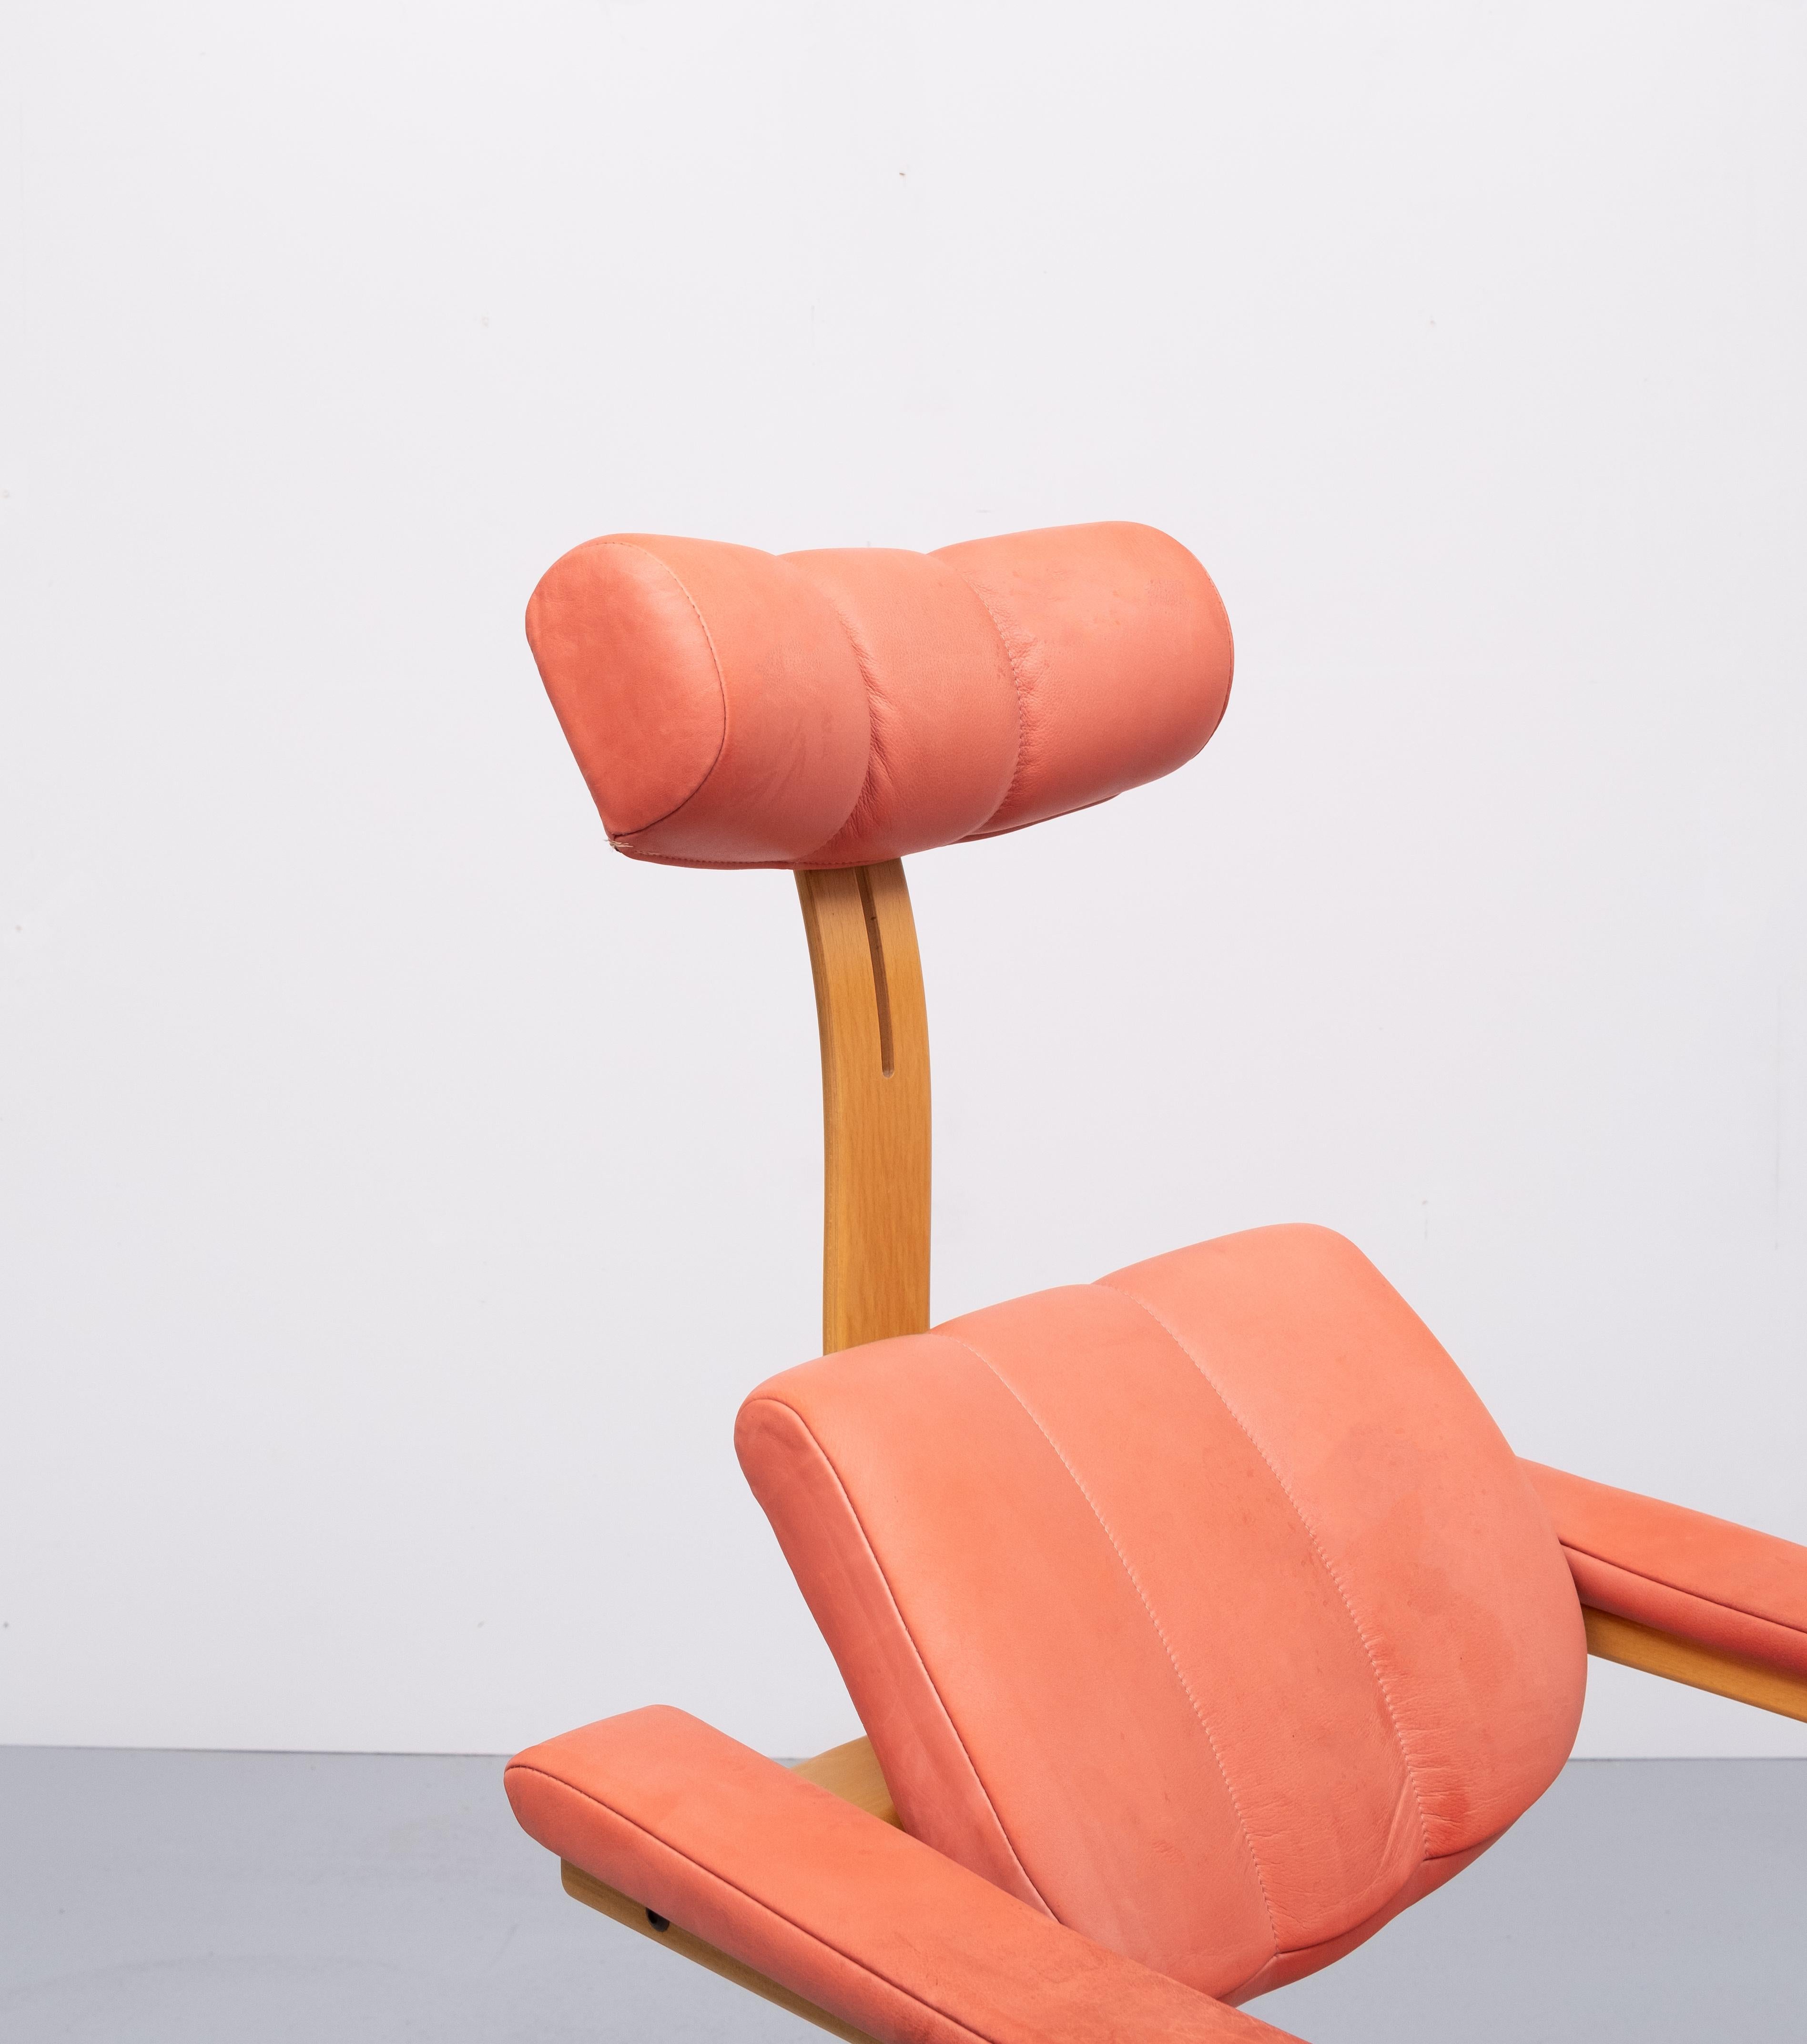 This is the Duo Balance chair by Peter Opsvik, with original label shown in a picture, a Norwegian industrial designer best known for his innovative and ergonomic chairs. Duo’s angle is adjusted by the body’s movements and users can switch between a